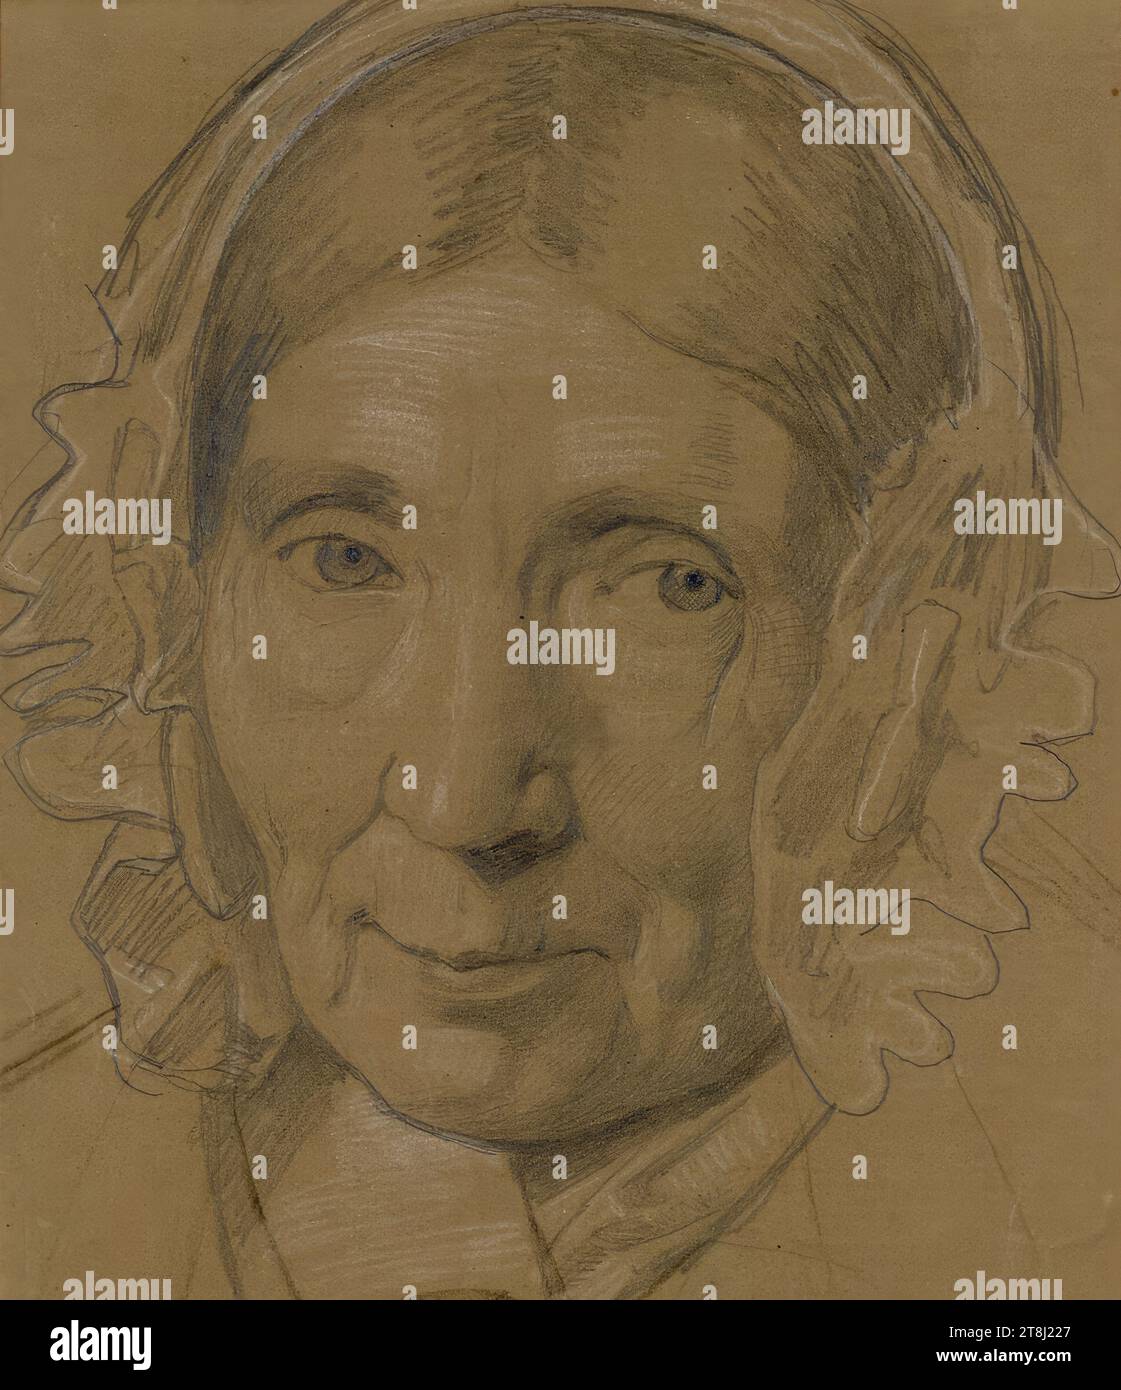 Head of an old woman with a hood, Wilhelm von Kügelgen, St. Petersburg 1802 - 1867 Ballenstedt, 19th century, drawing, pencil, heightened with white chalk, on brown paper, 262 x 227 mm, Prince Johann Georg of Saxony, L. 1466, verso Stock Photo